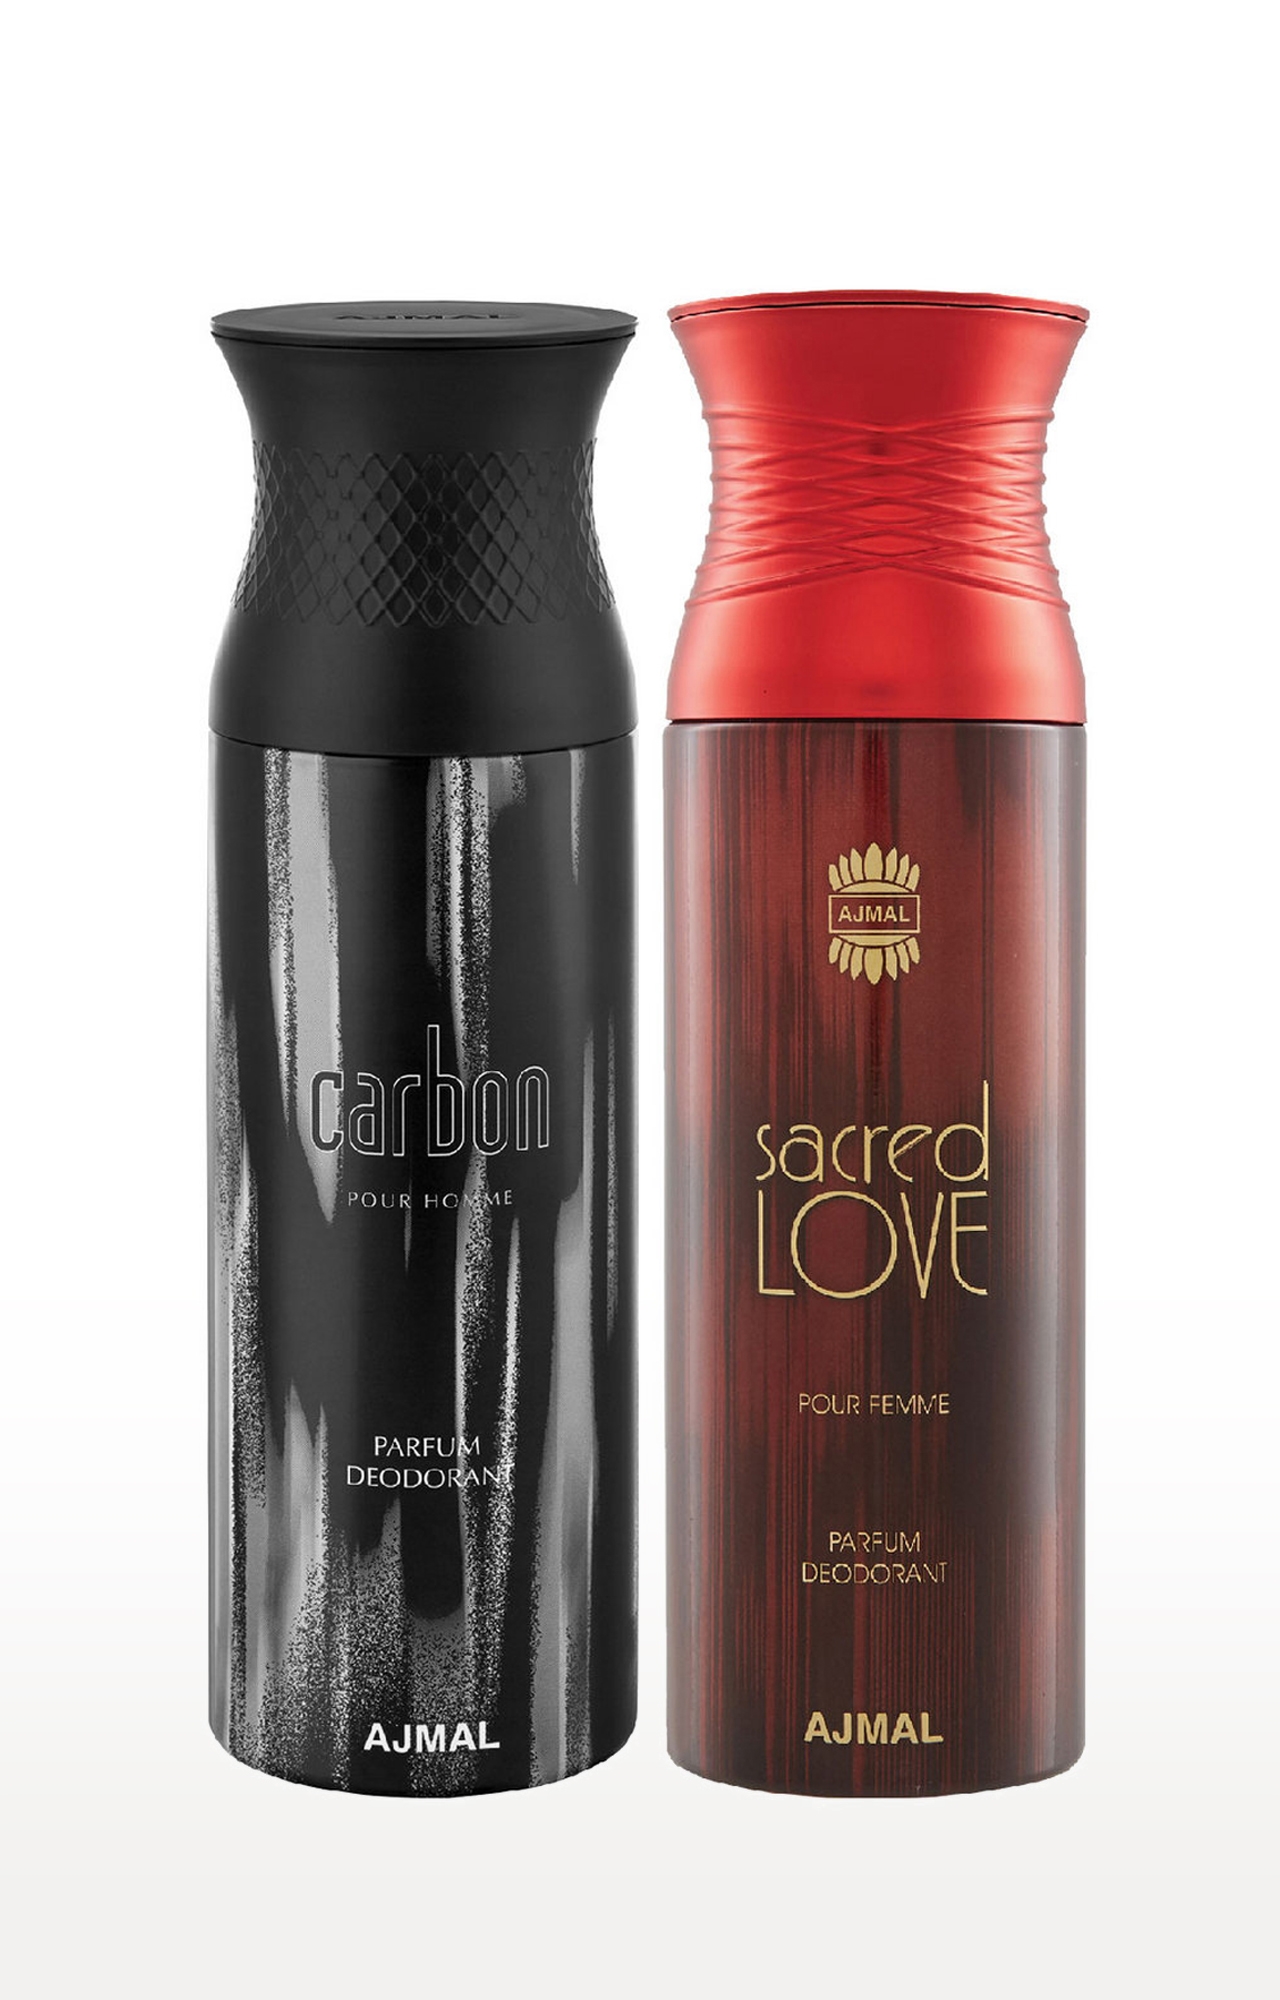 Ajmal | Carbon Homme and Sacred Love Deodorant Spray - Pack of 2